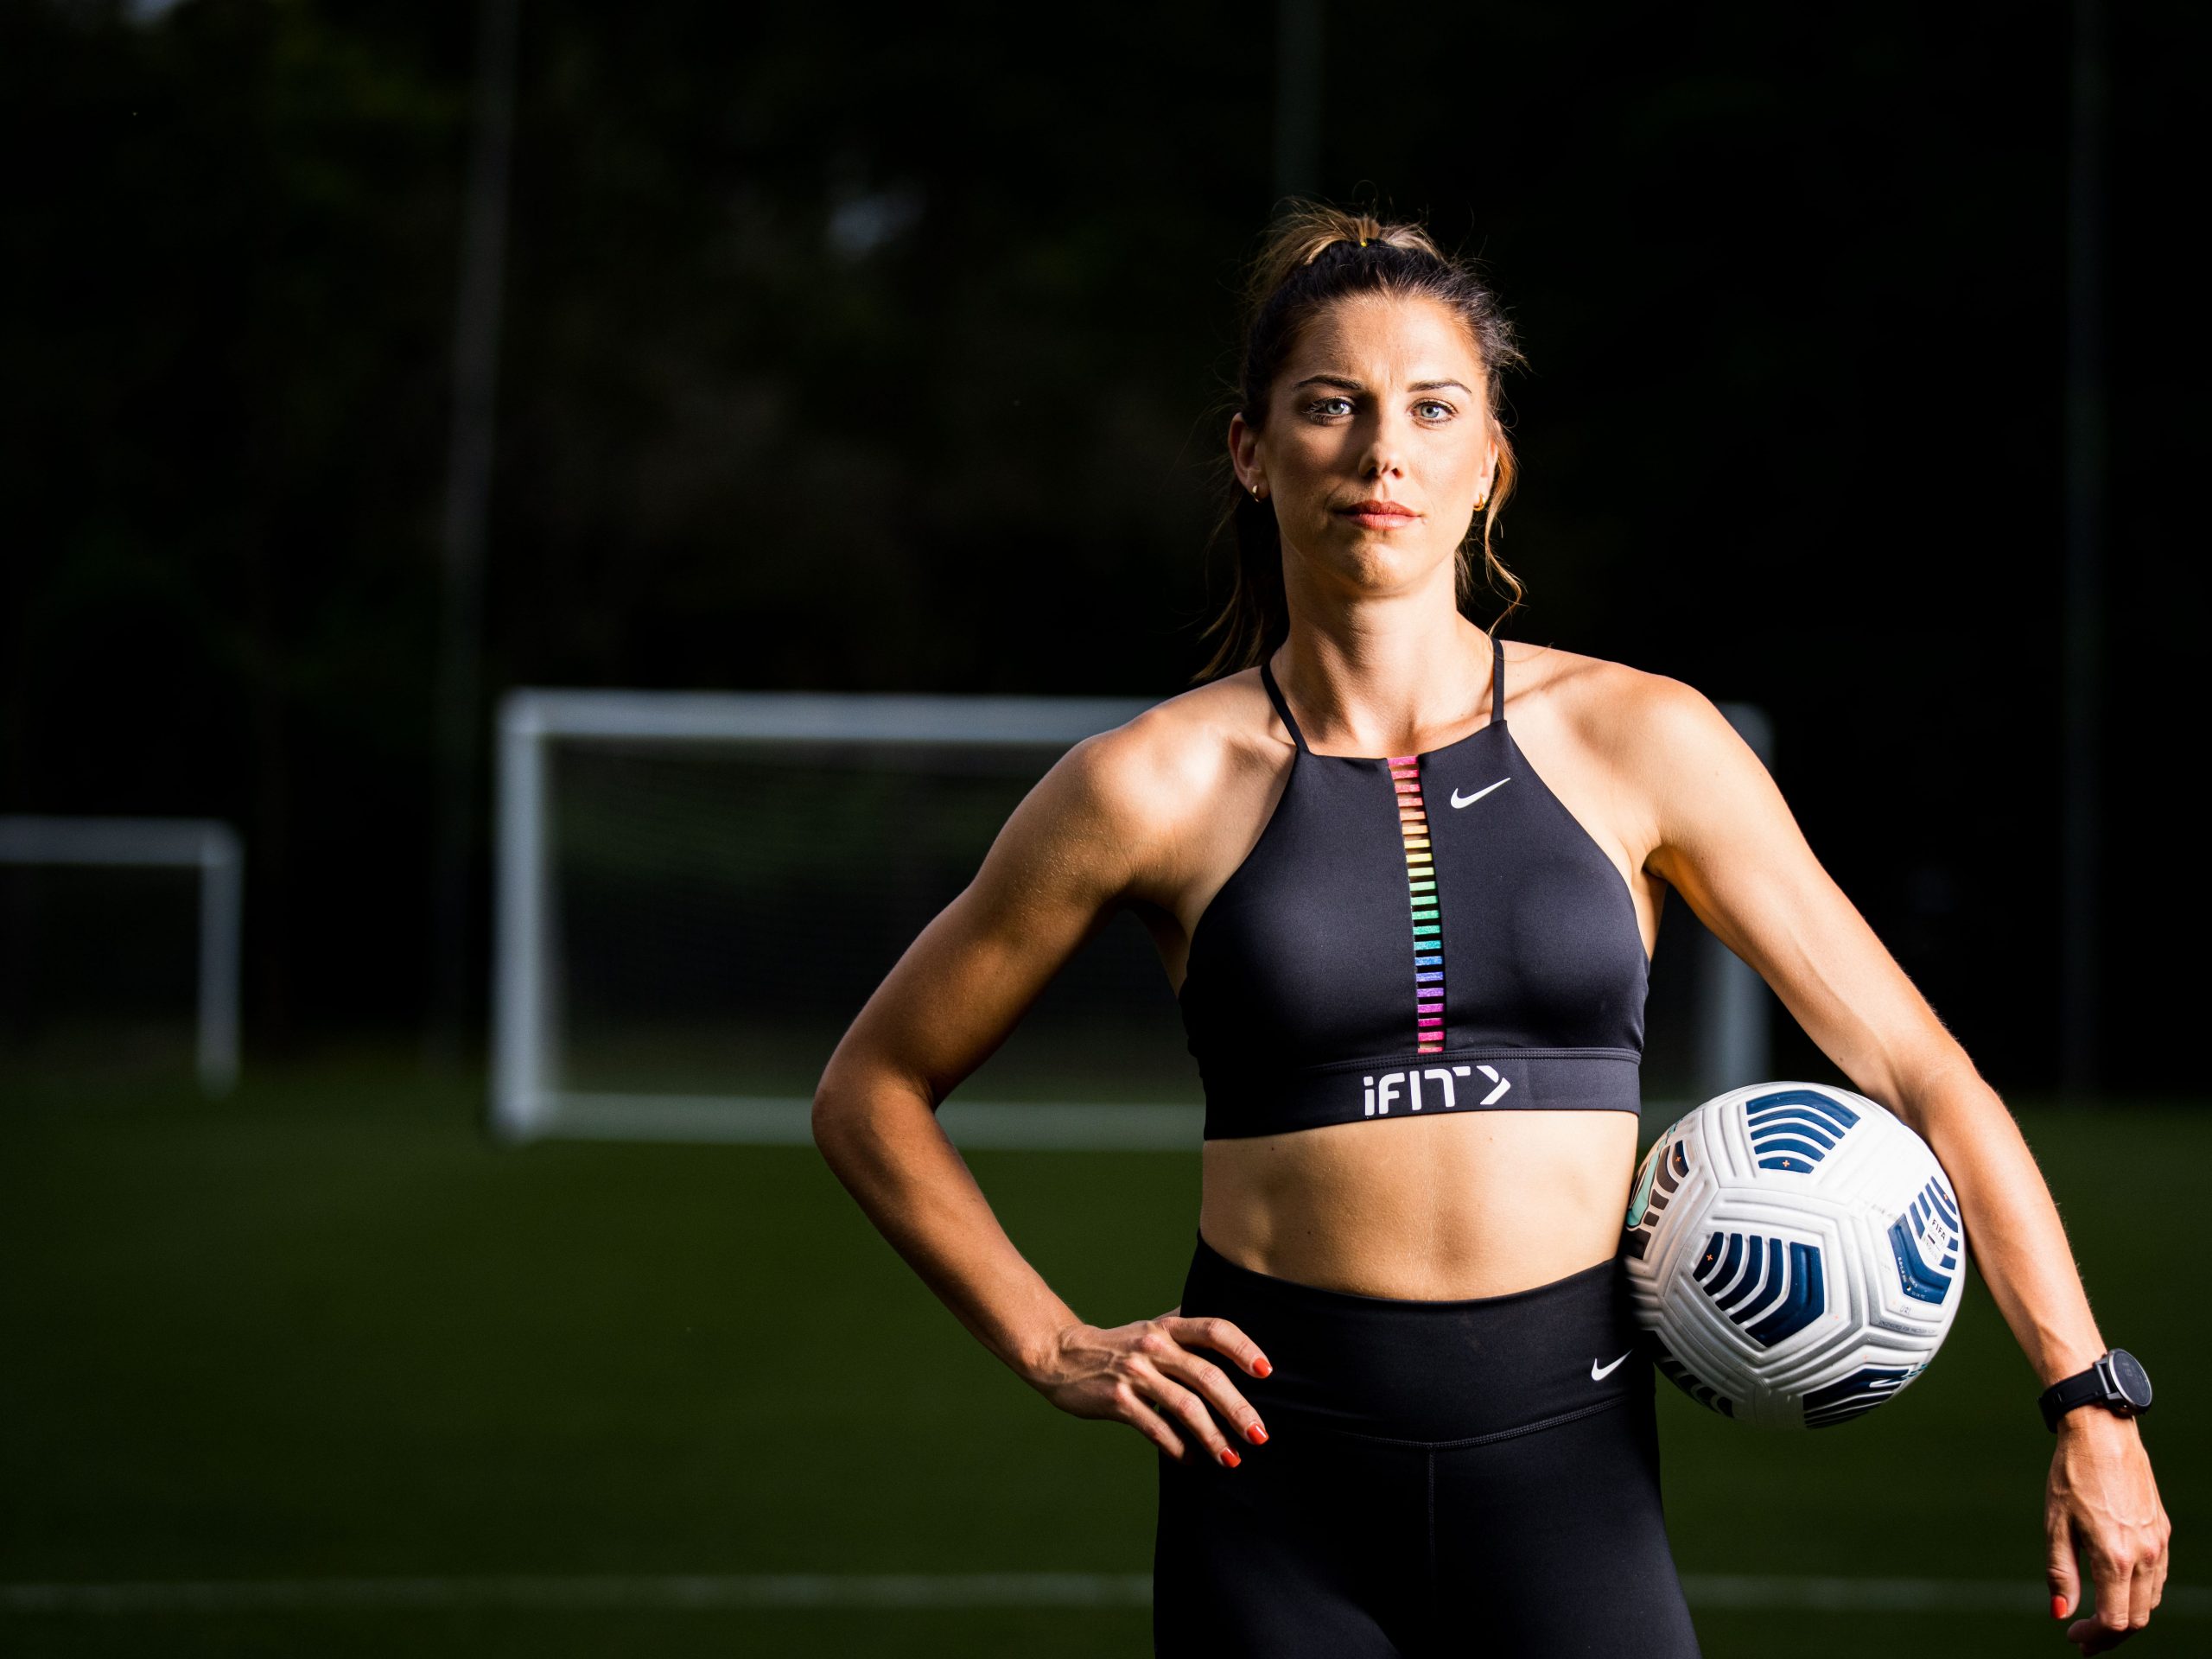 US soccer player Alex Morgan wearing iFit gym clothes and holding a soccer ball under one arm on a soccer field.